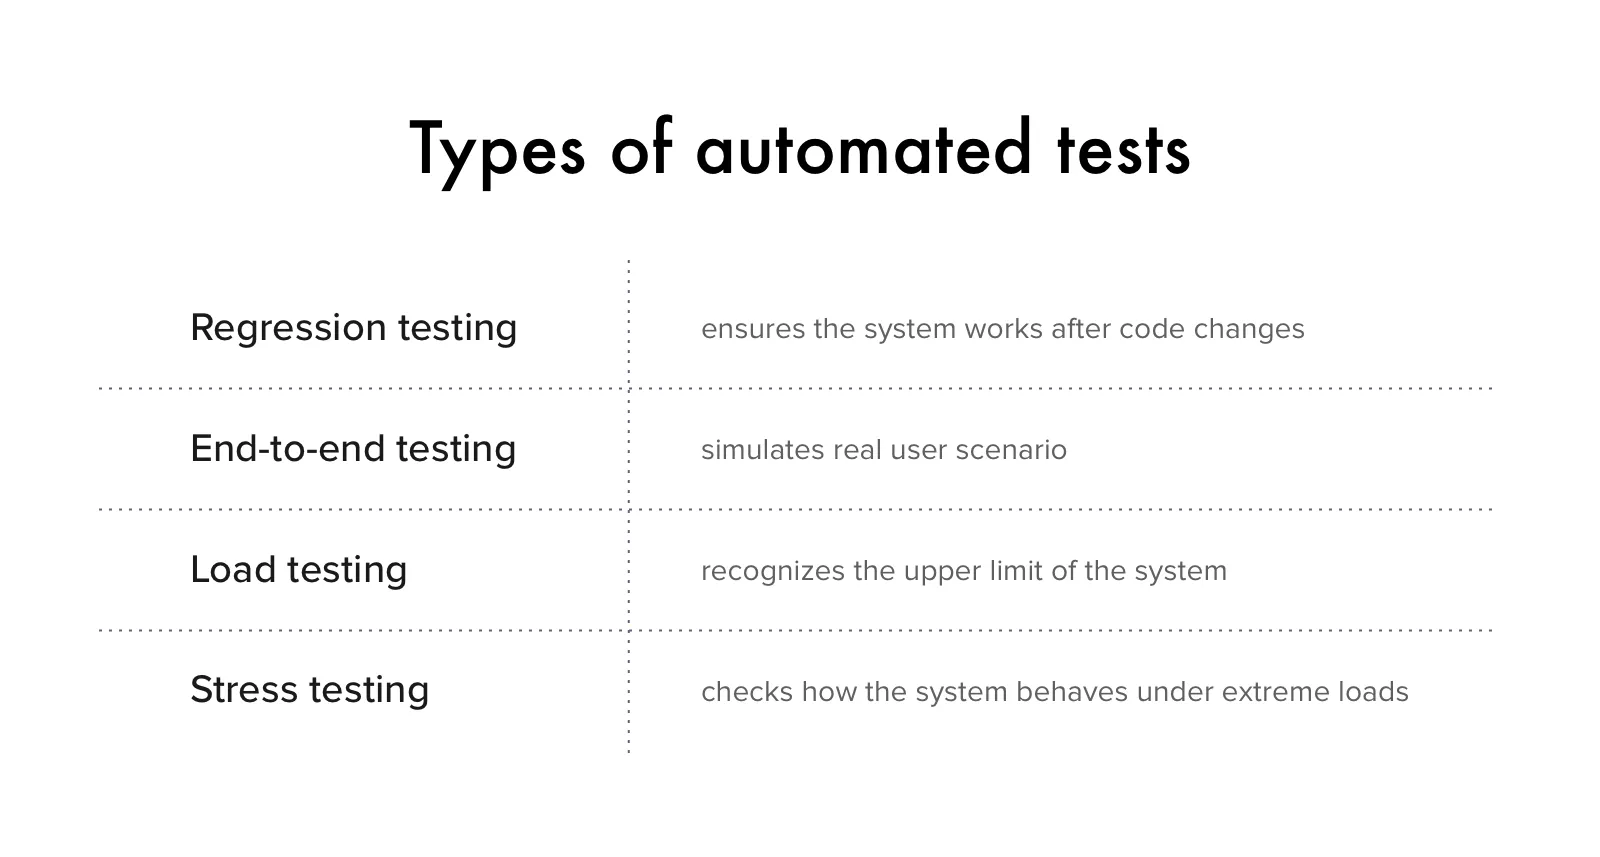 Types of automated tests